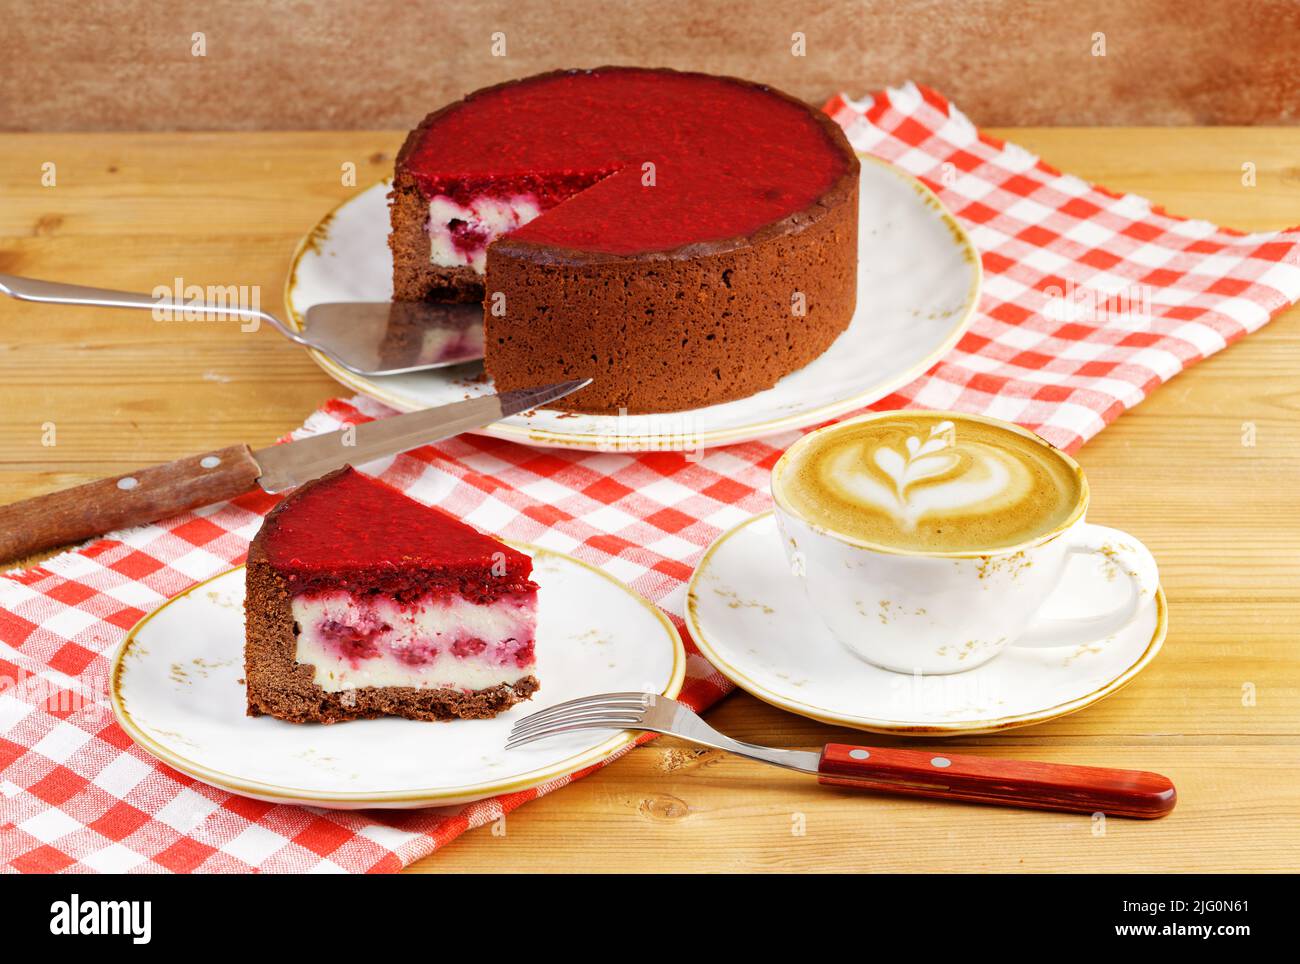 Homemade raspberry and strawberry cheesecake and cup of coffee cappuccino on wooden table. Stock Photo